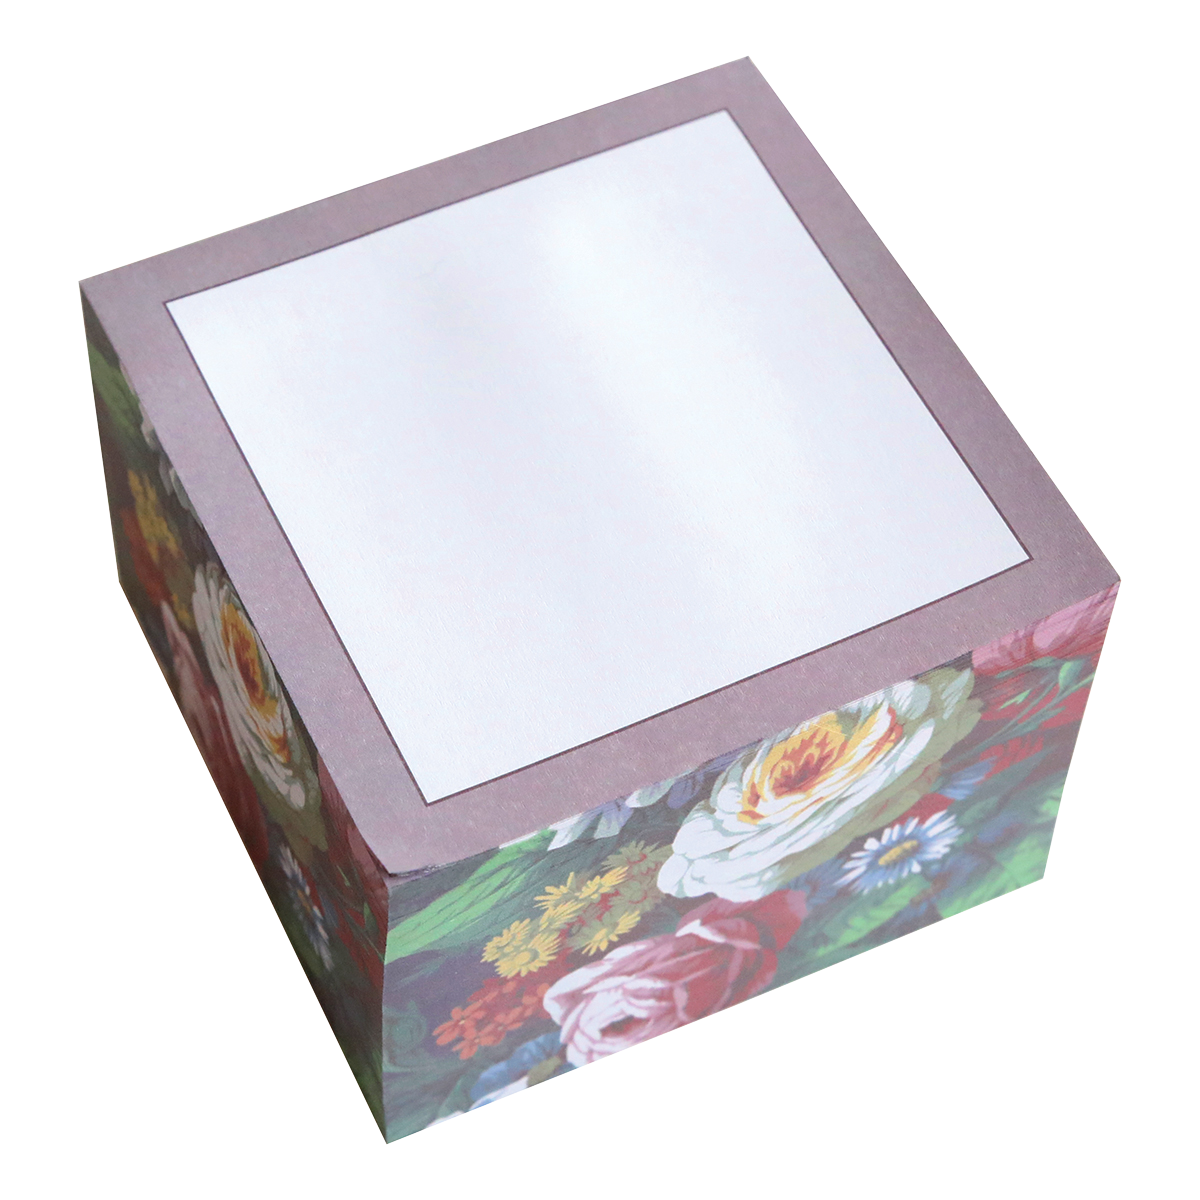 Astrid Sticky Notepad Block with a hot pink pattern and a blank label on the lid.